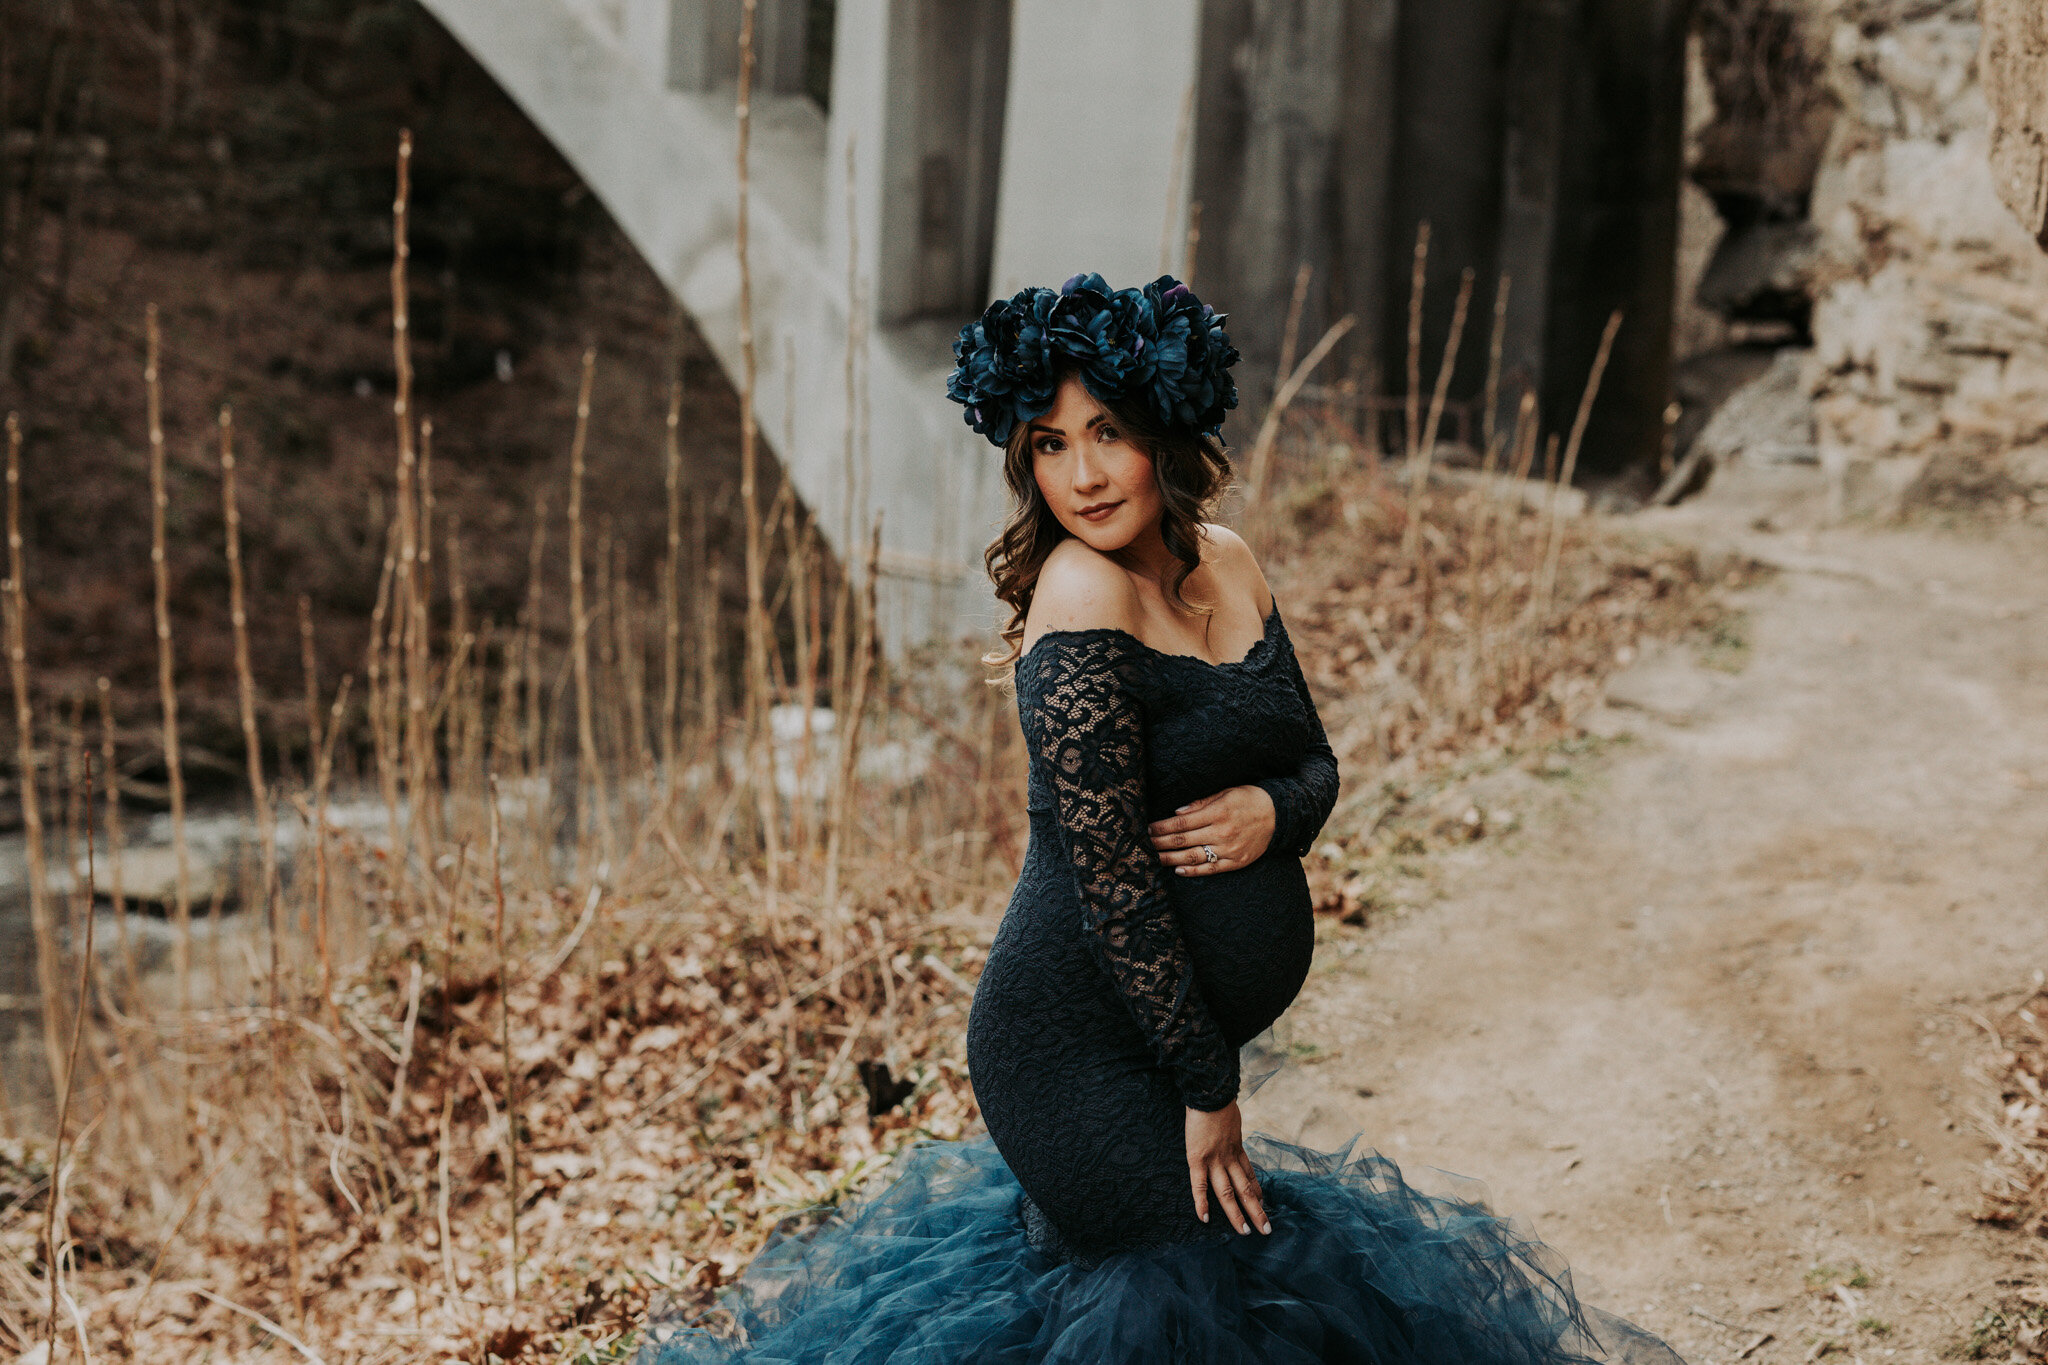 Blue_Tulle_Materntiy_Dress_Fashion_Lace_Baby_Boy_Mom_to_Be_Mill_Creek_Park_Lantermand_Mill_Spring_2021_by_Newbron_Photographer_Christie_Leigh_Photo_Mahoning_COunty_Ohio_OH-4.jpg